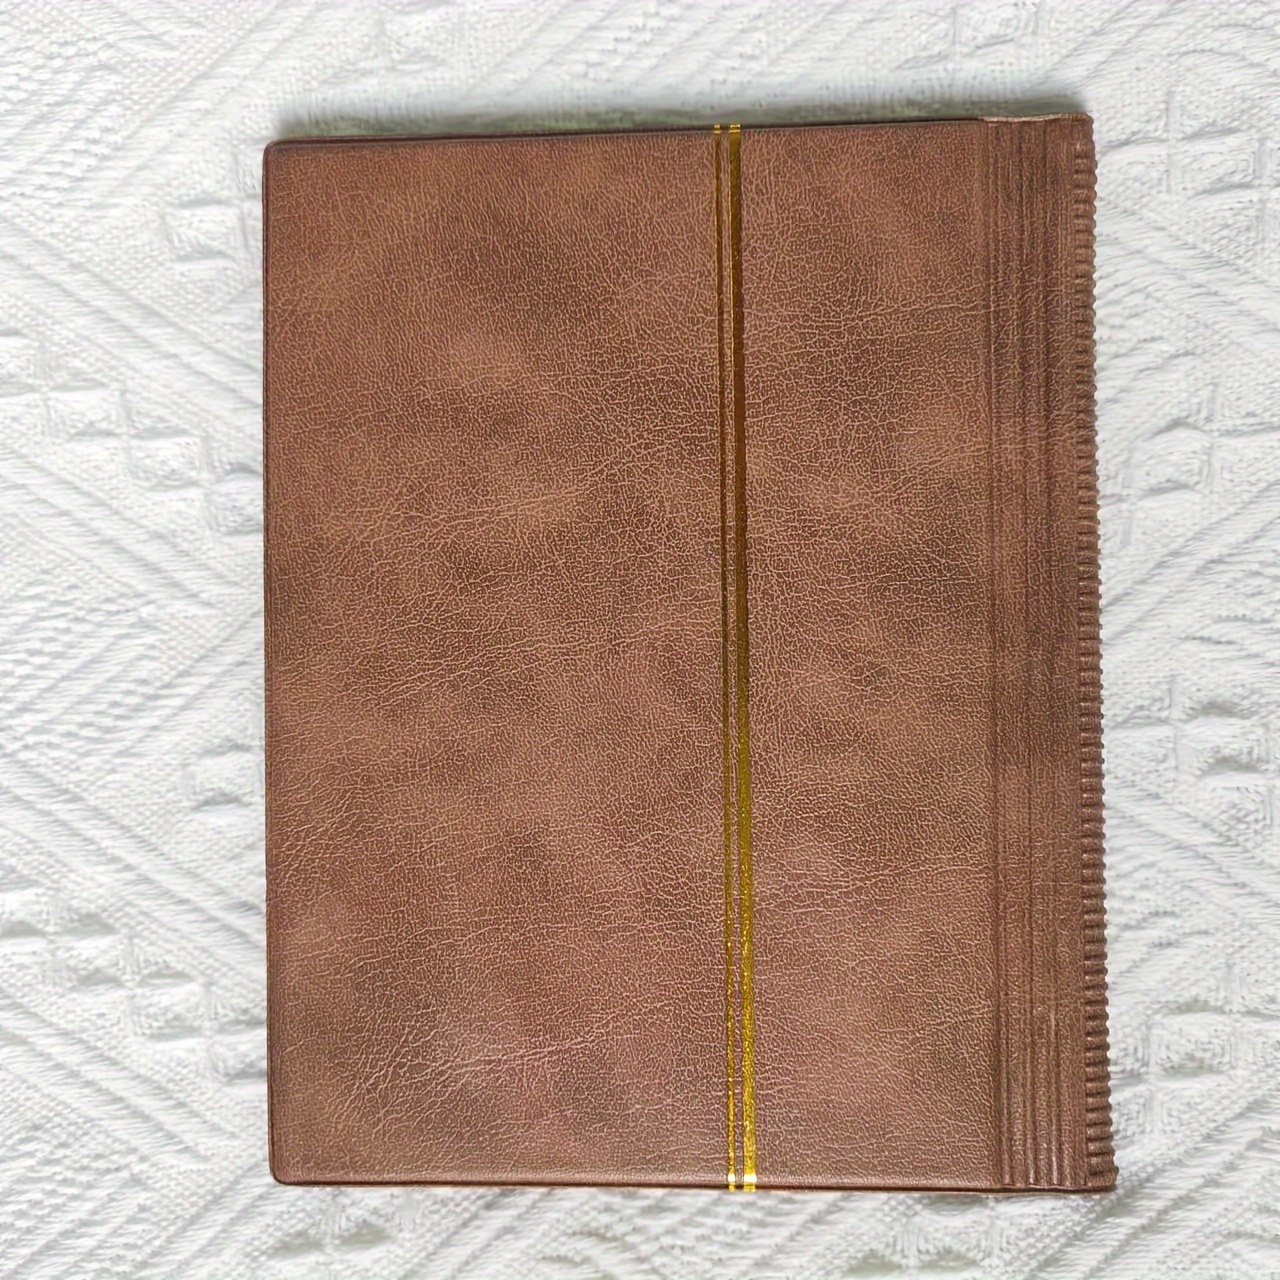 Stamp Collecting Albums - Pocket Stockbook in Brown includes 5 White Pages